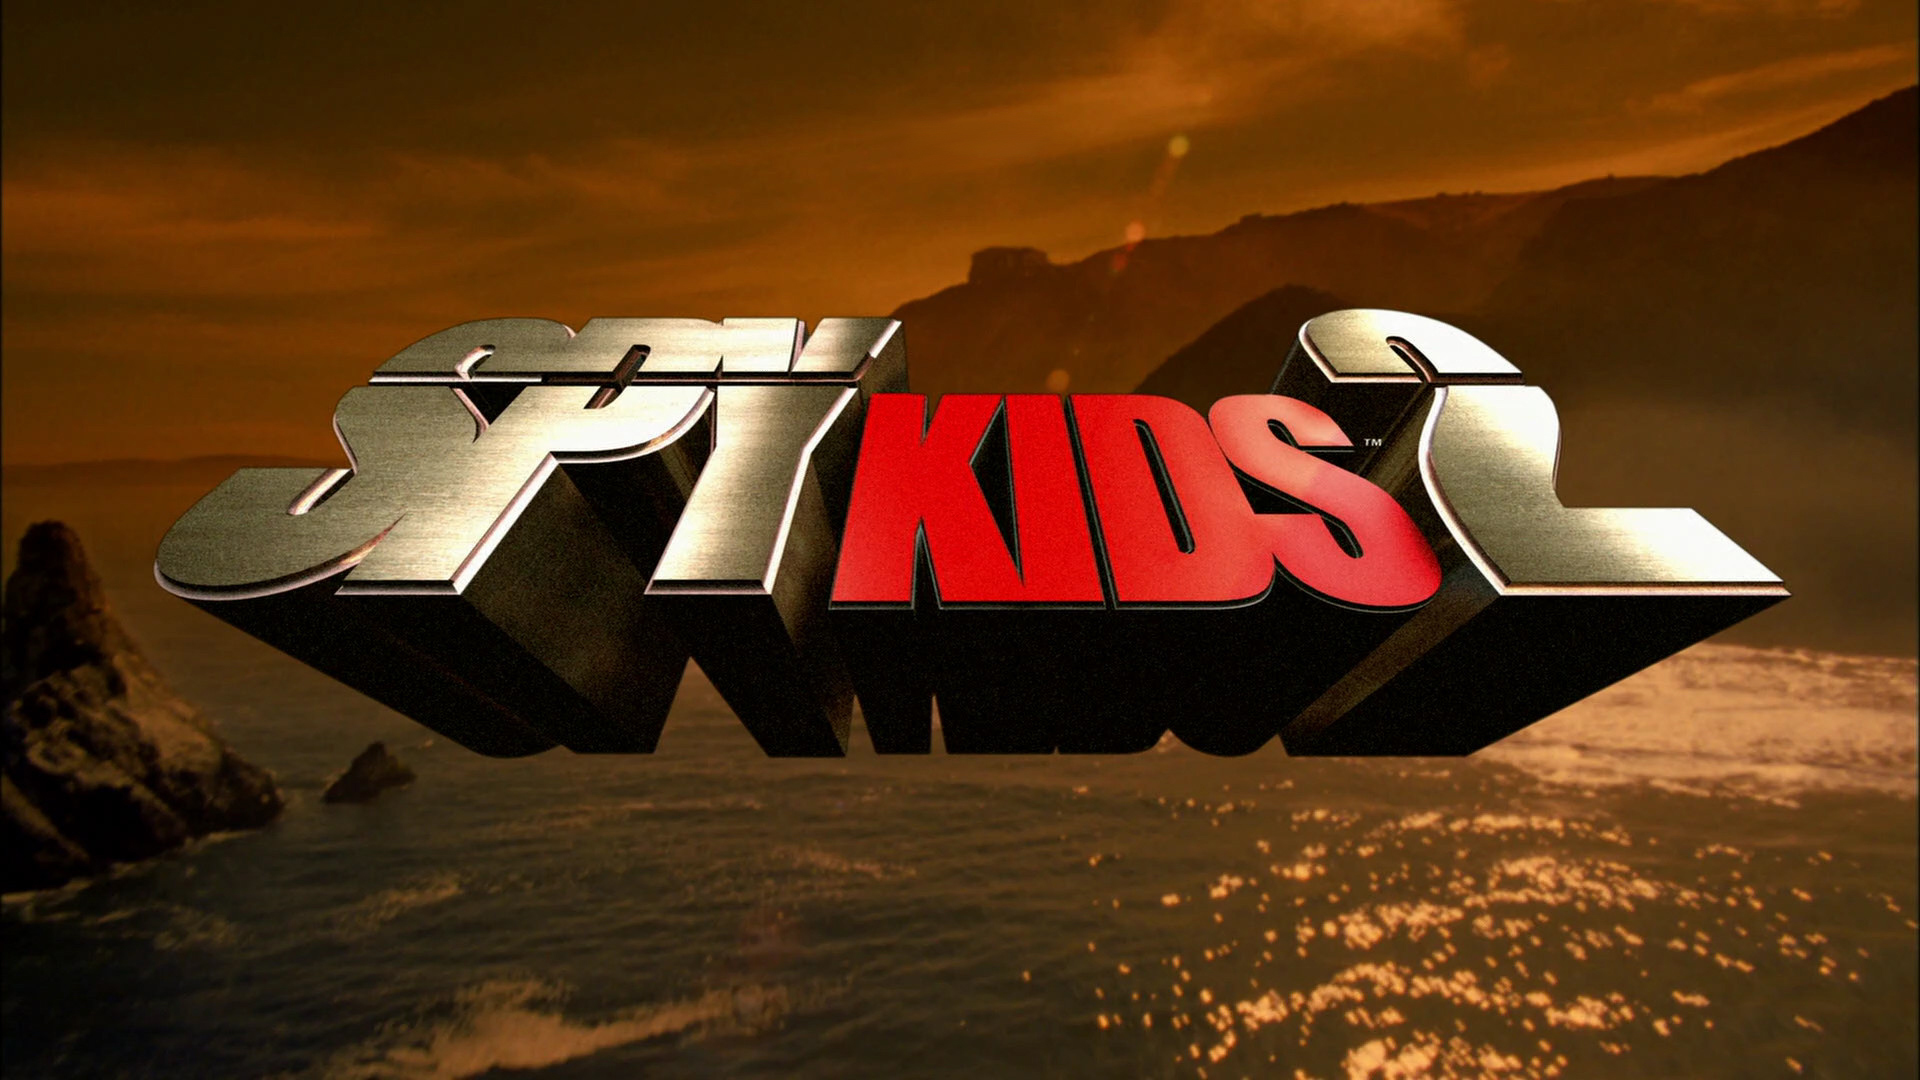 Movie Spy Kids 2: The Island of Lost Dreams HD Wallpaper | Background Image